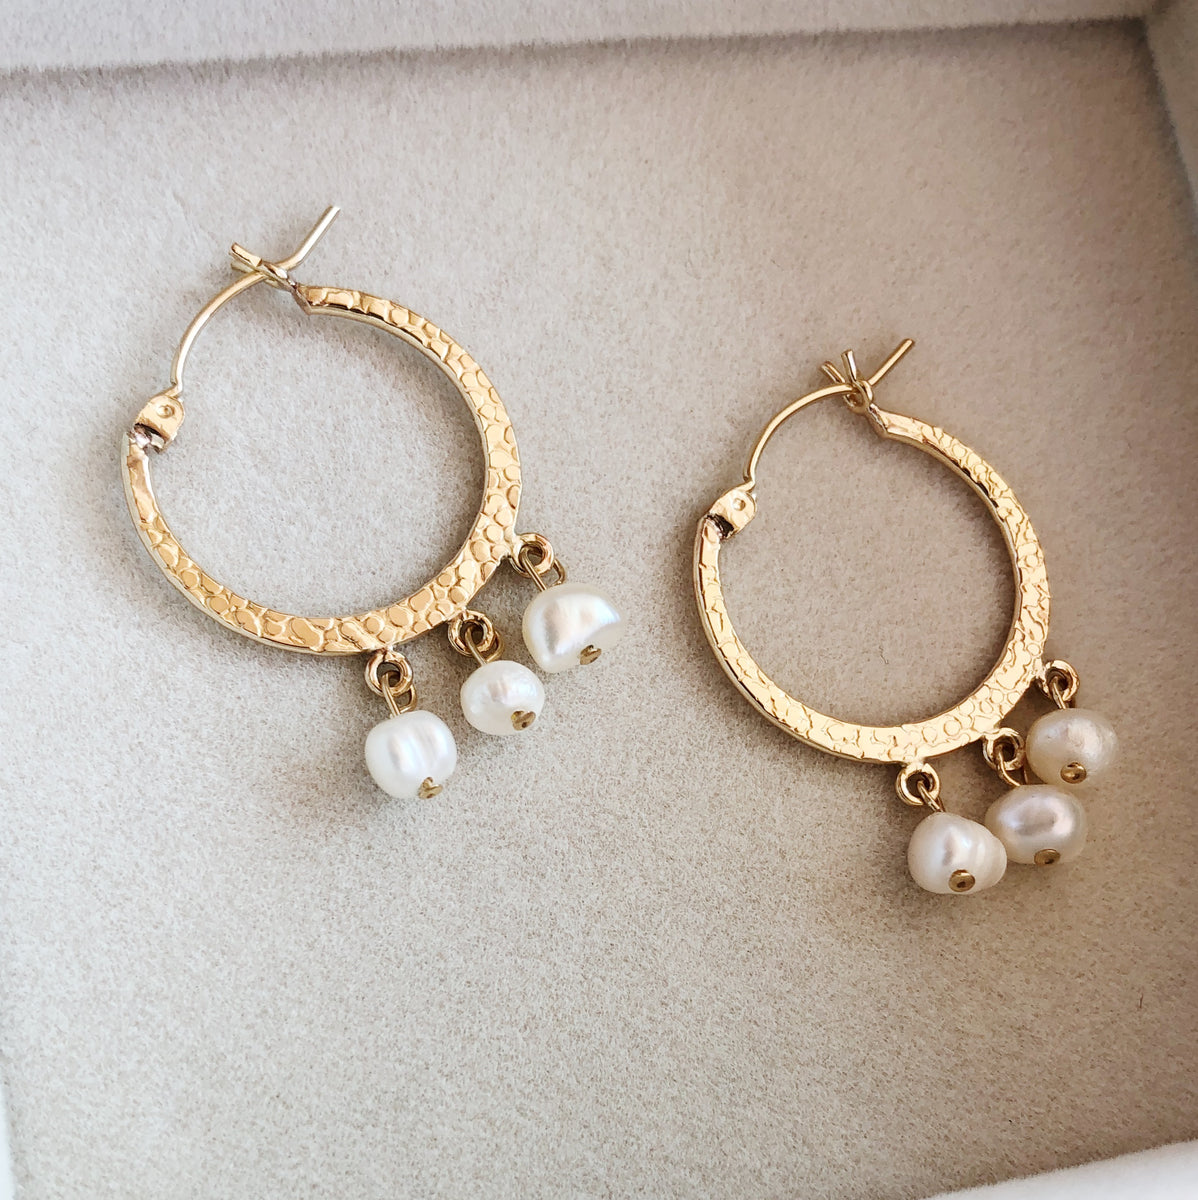 Stunning Gold Hoops with Pearls